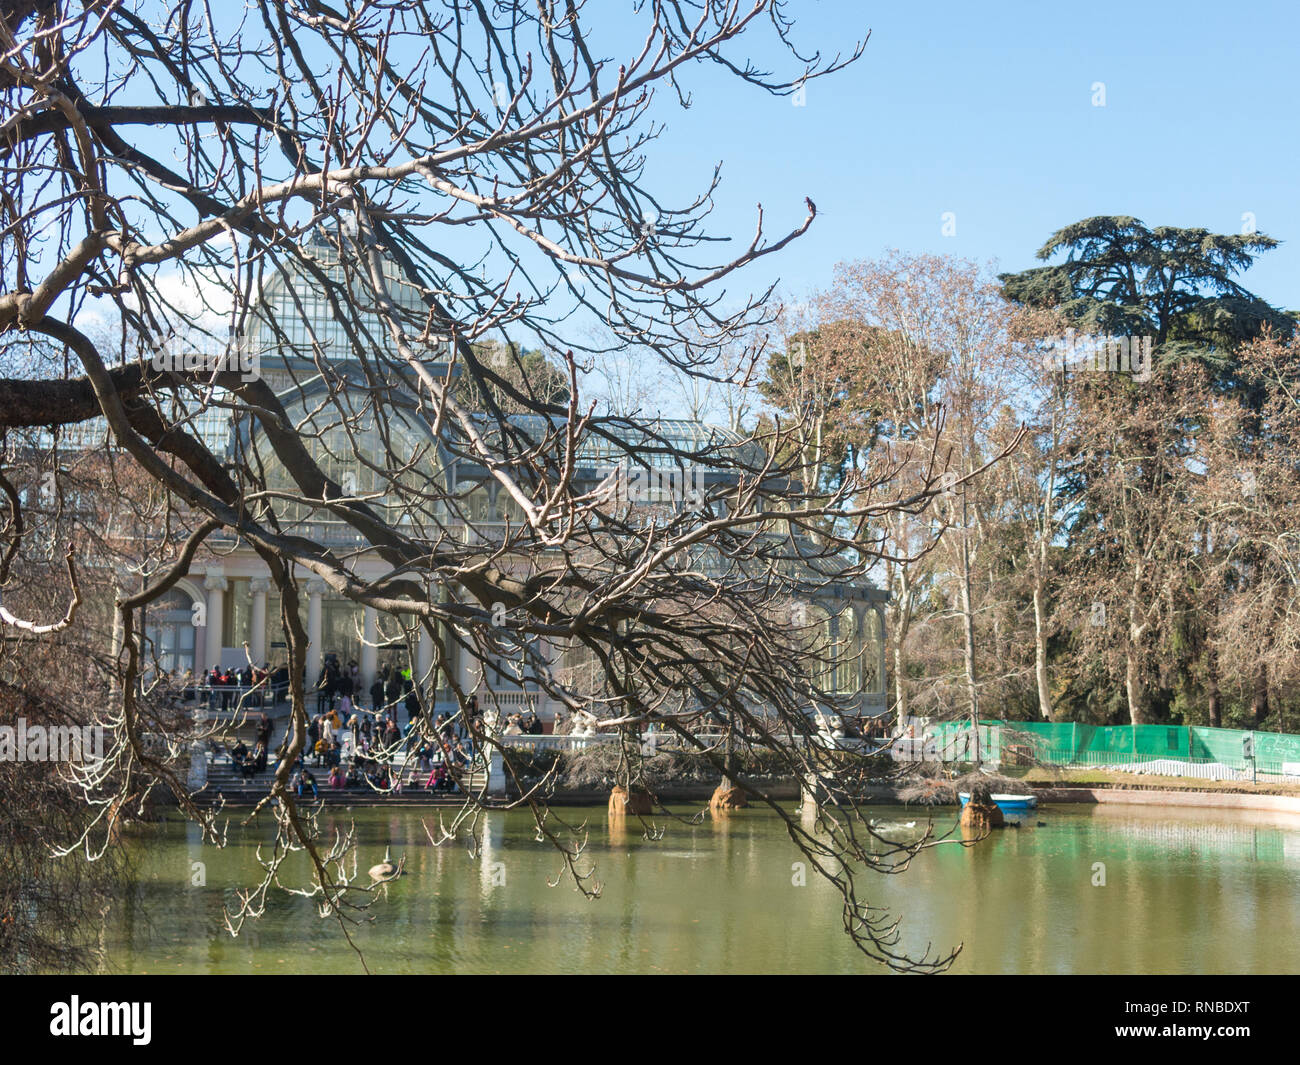 Madrid, Spain - January 27, 2018: Crystal Palace (Palacio de cristal) in Retiro Park in Madrid, Spain. Retiro Park is one of the largest parks of the  Stock Photo